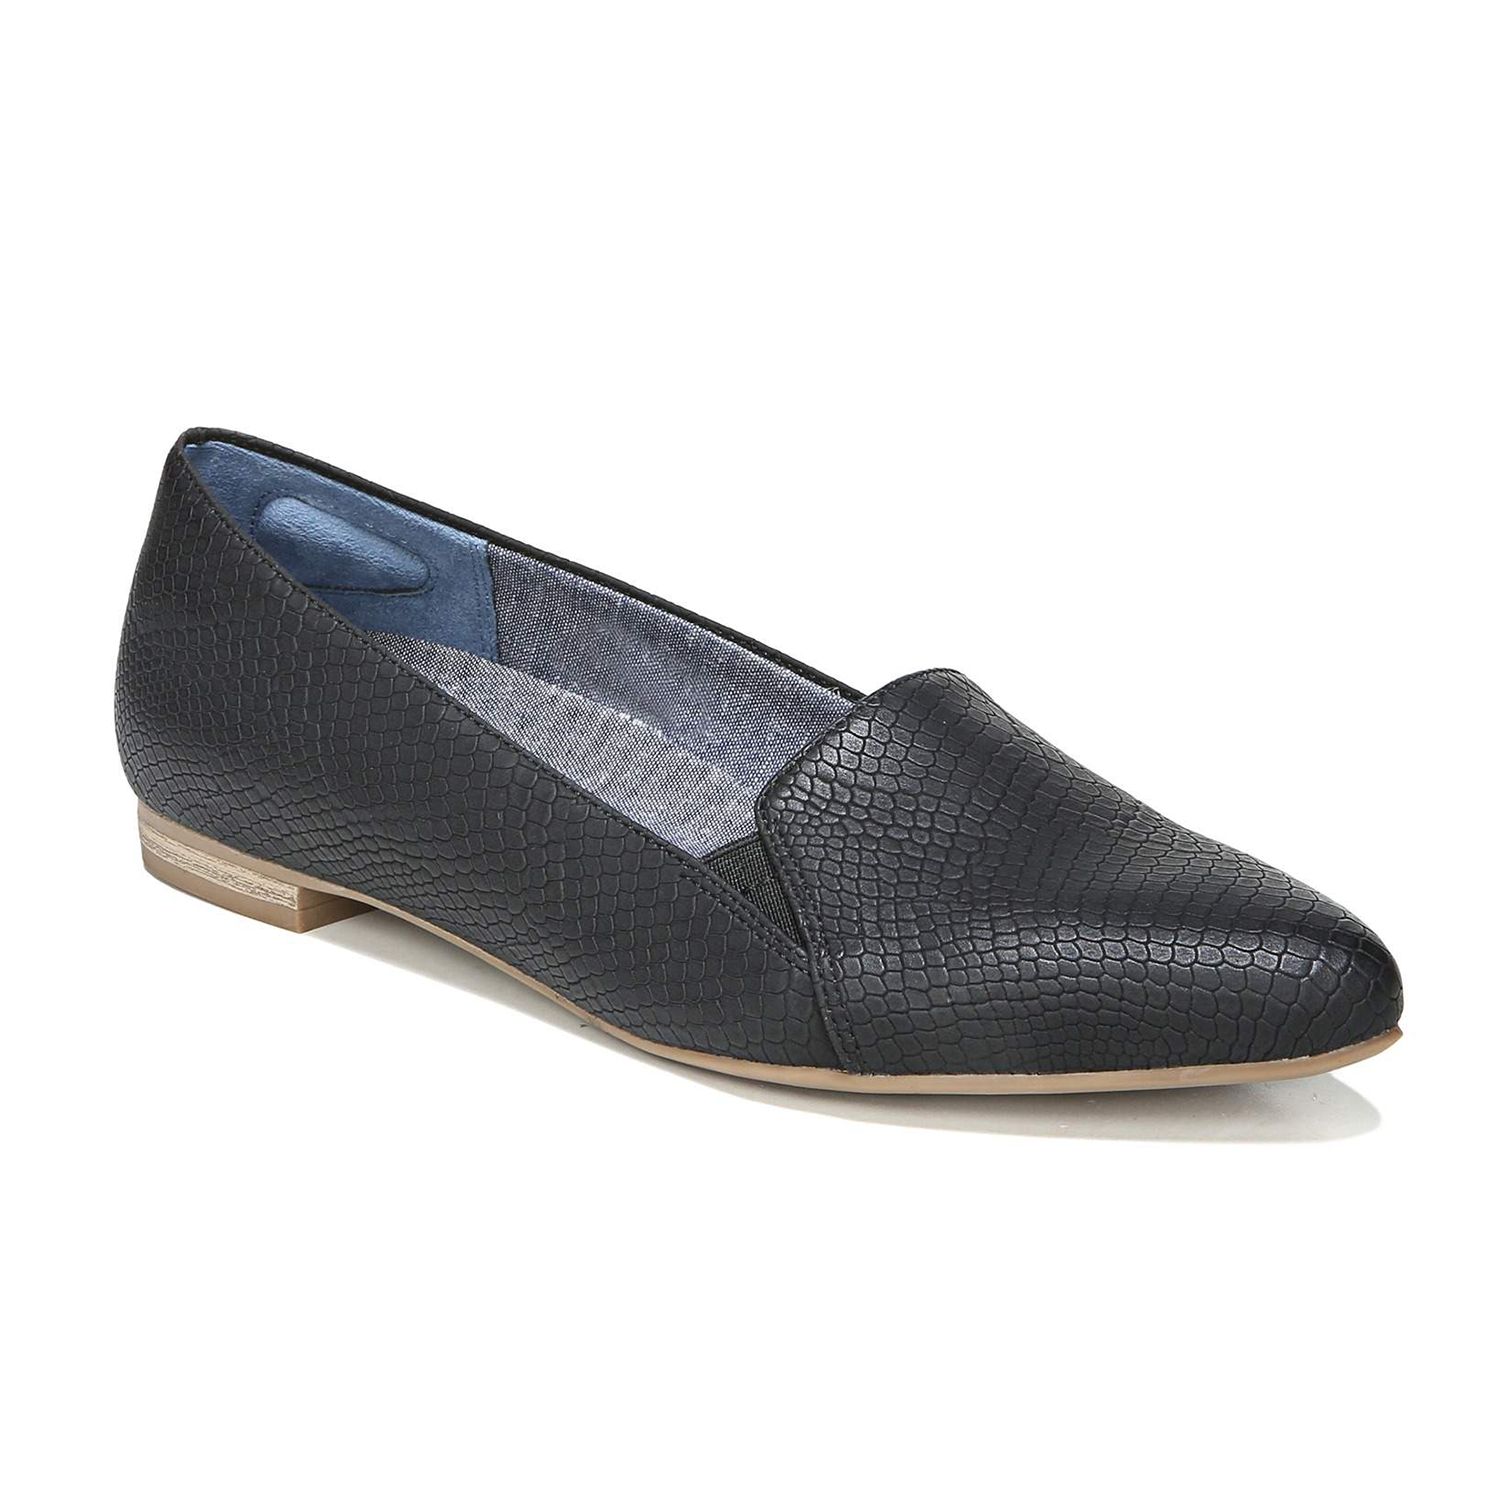 Dr. Scholl's Anyways Women's Loafers